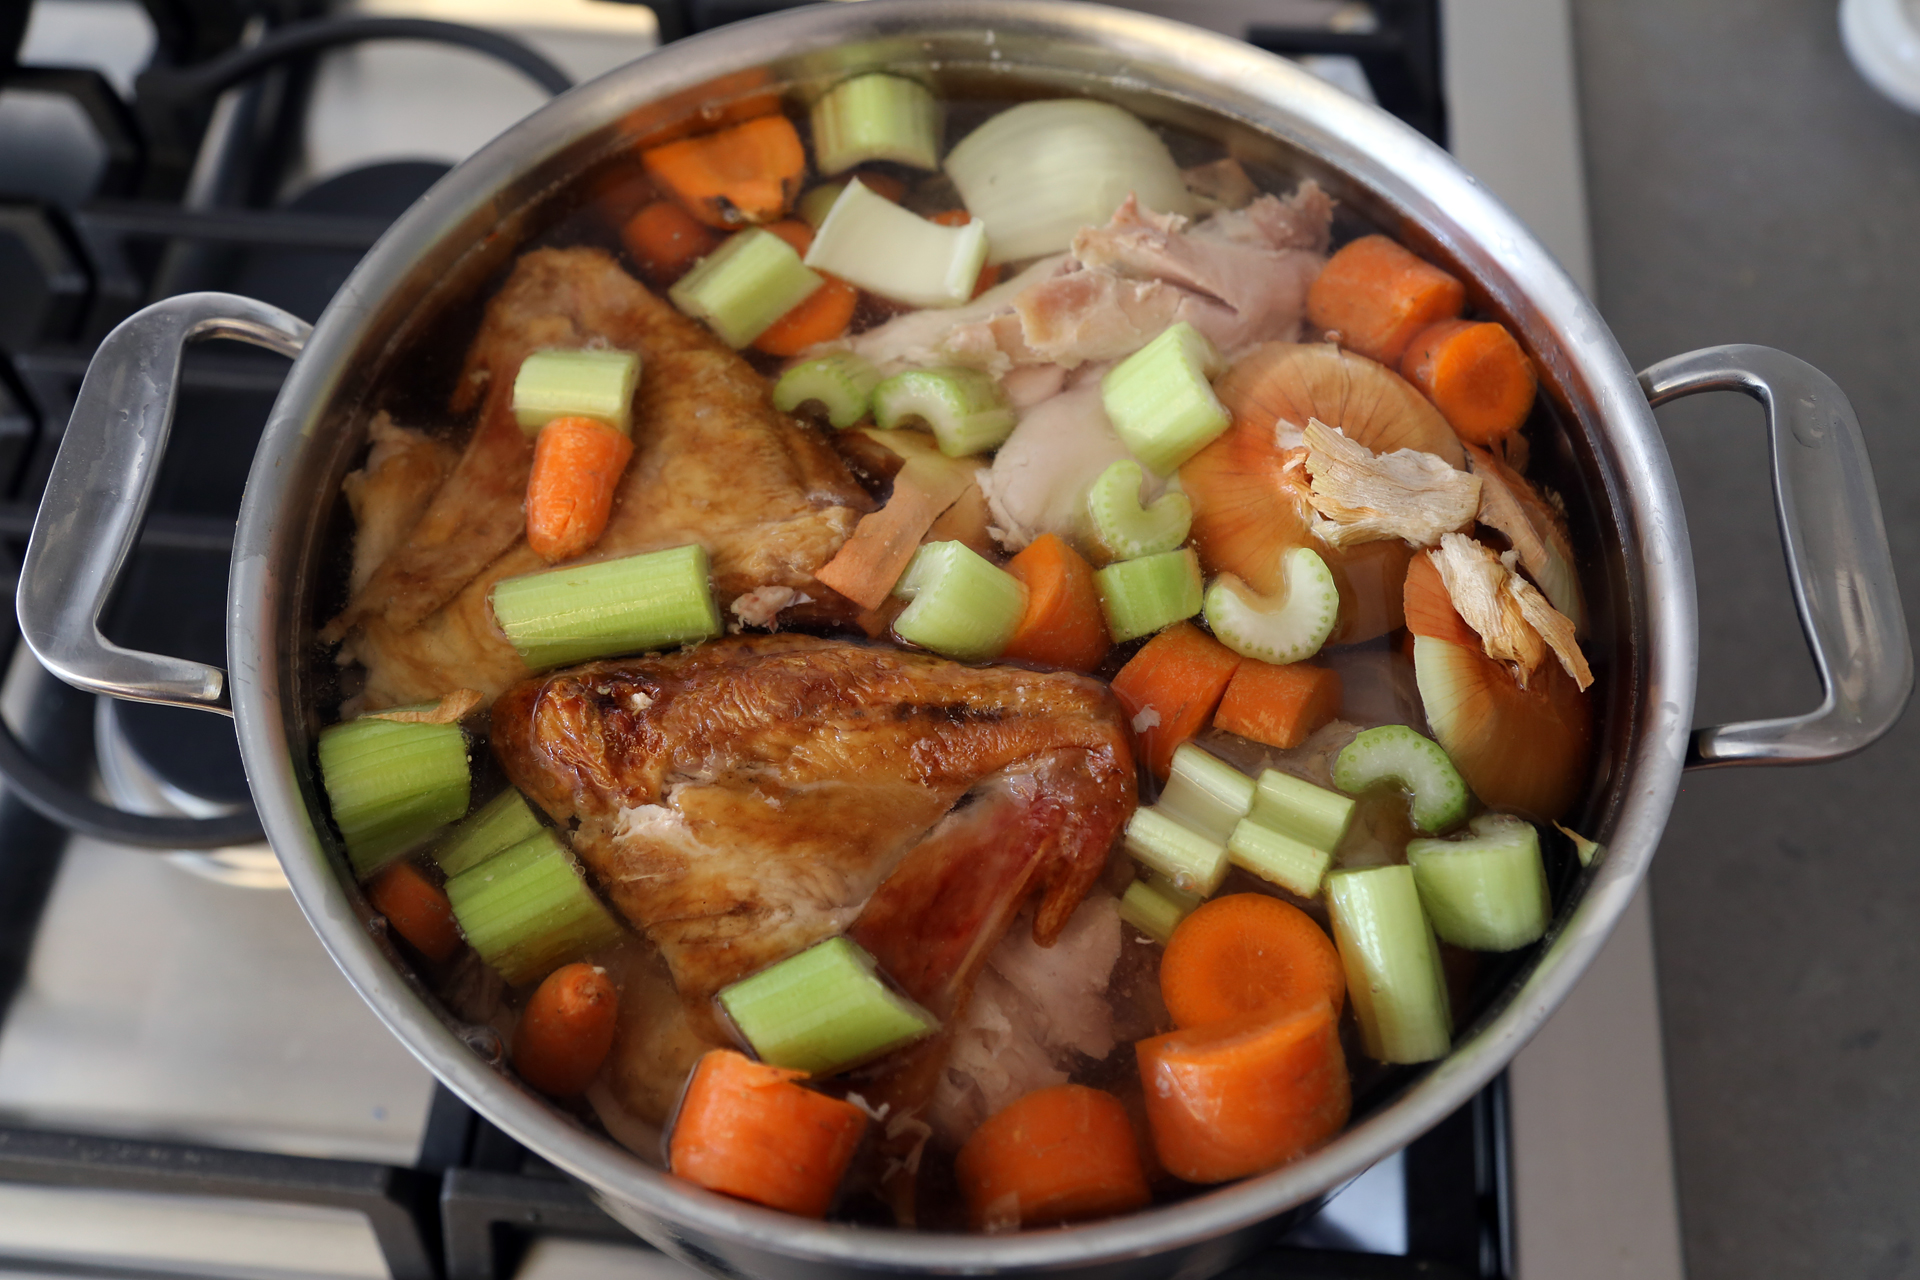 In a large stockpot, add the turkey and roasted vegetables, the onion, carrots, celery, and parsley.